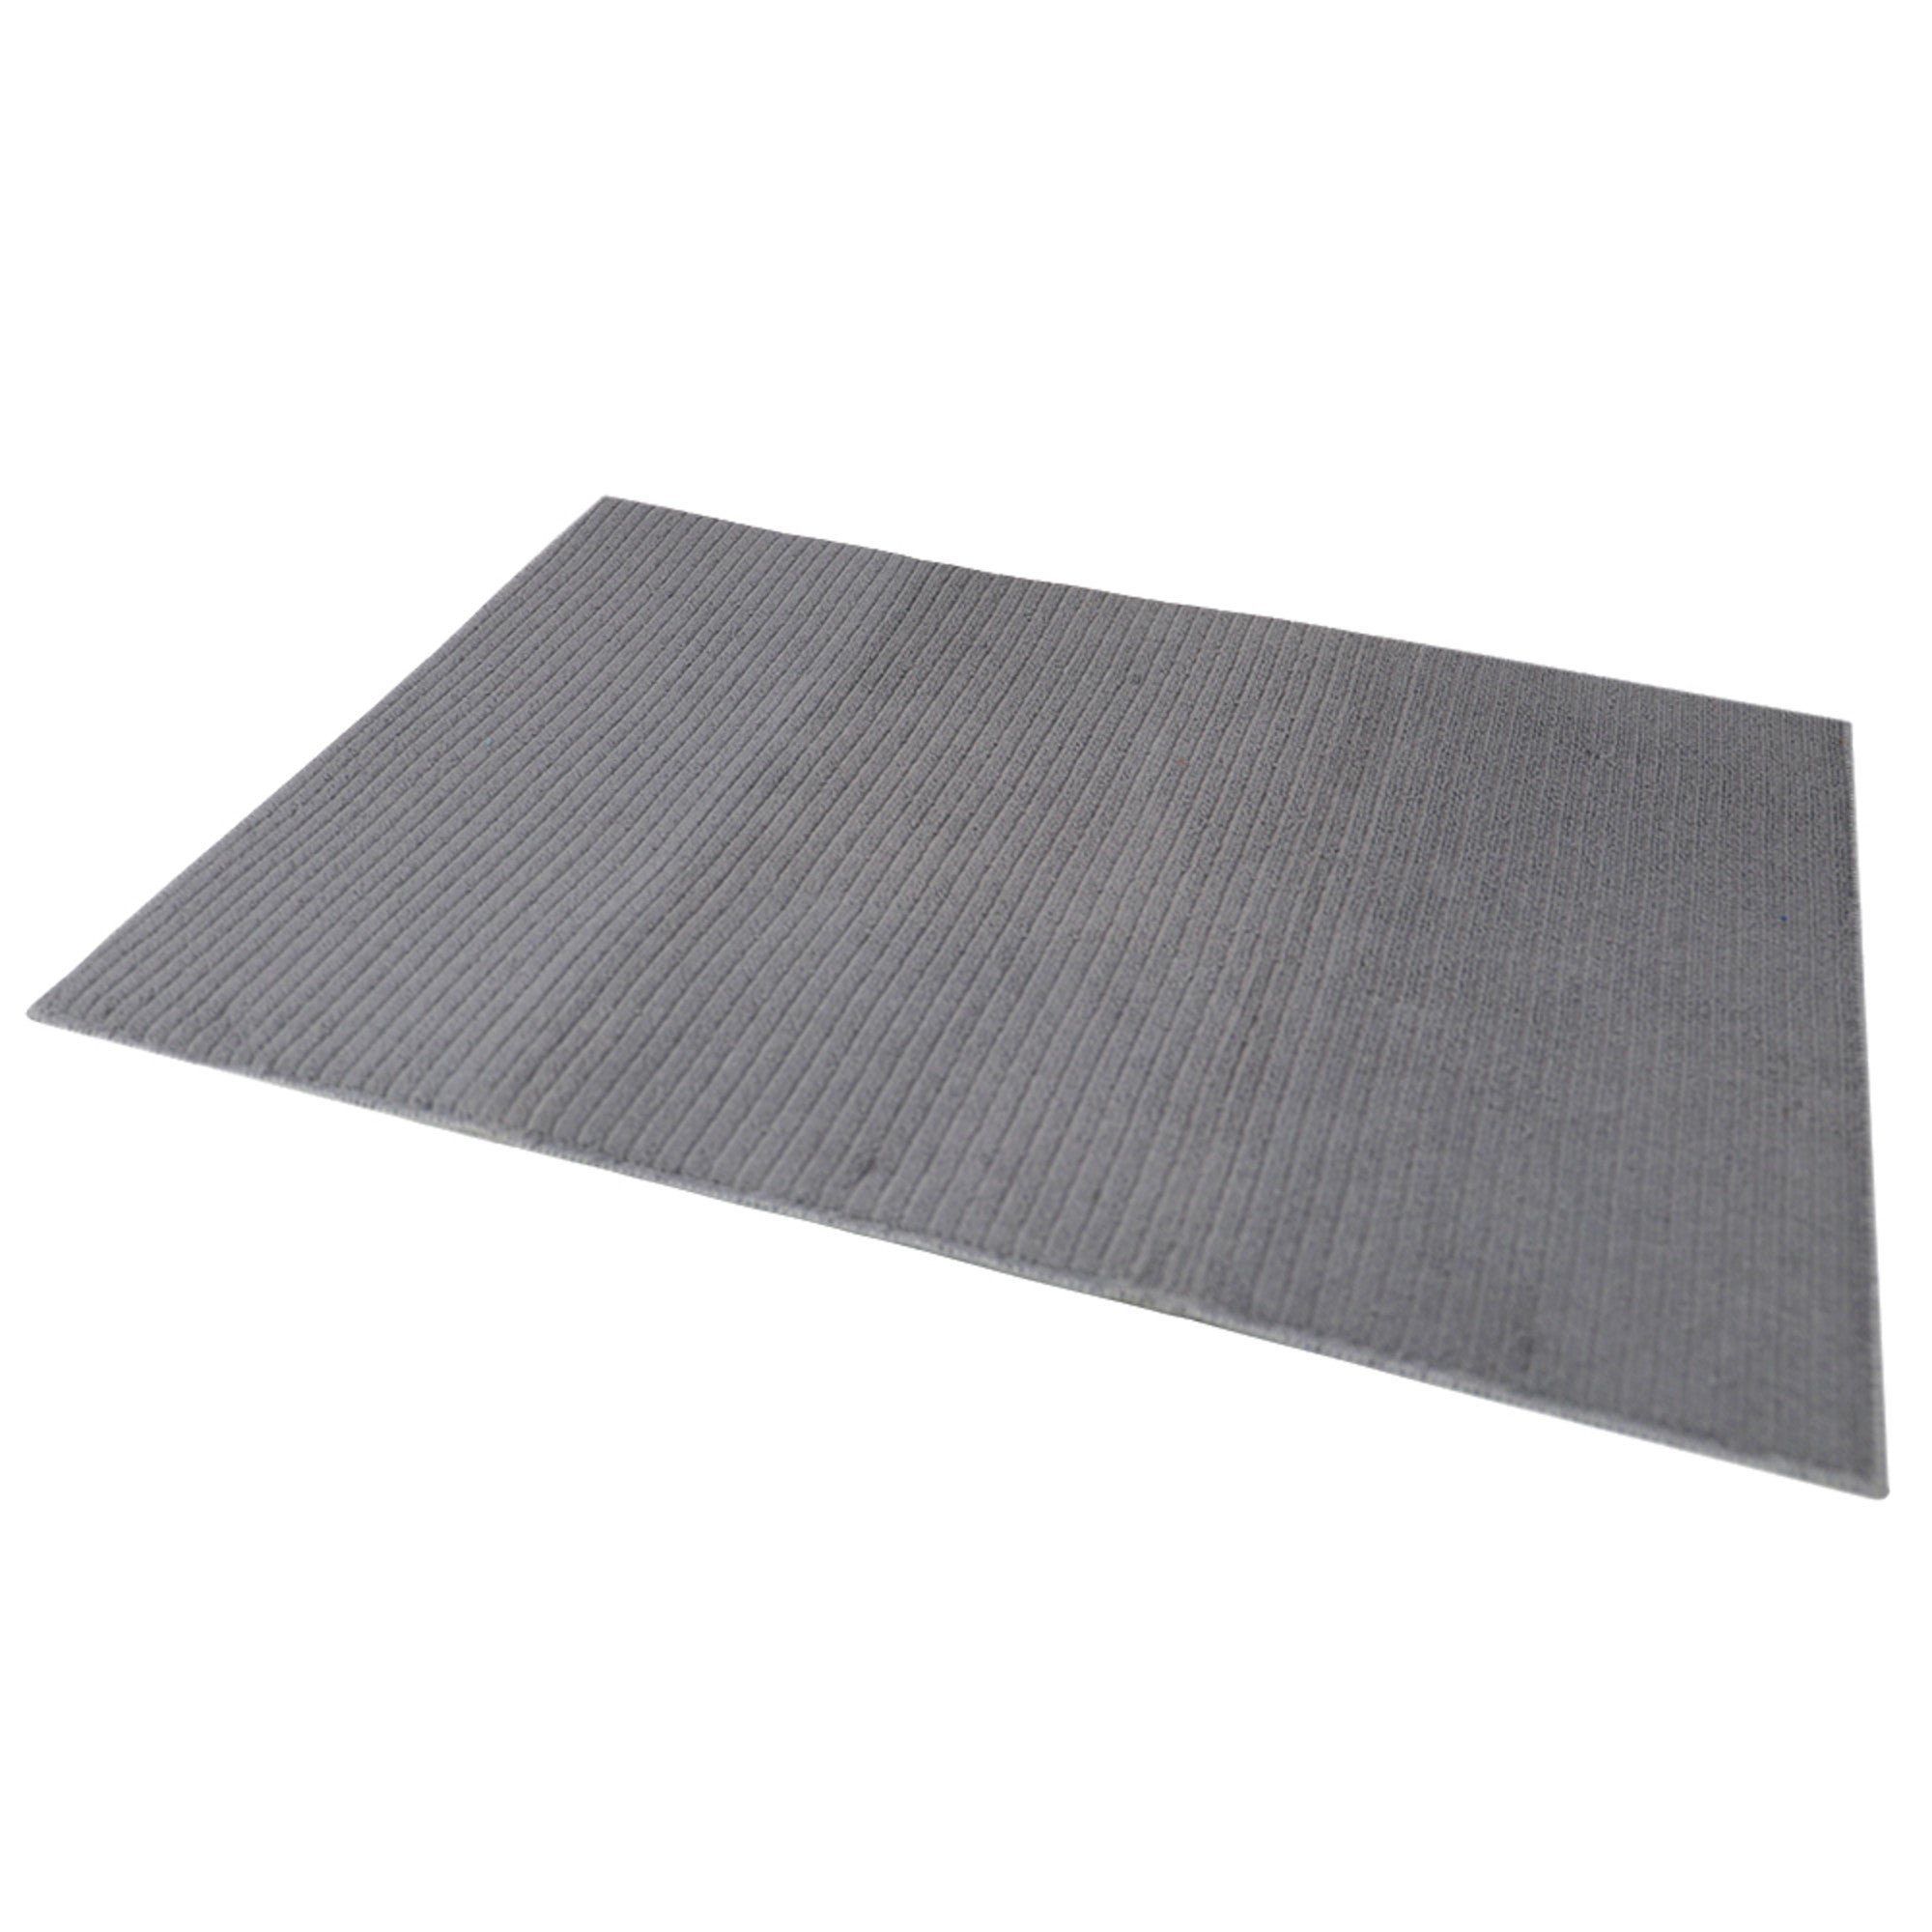 Home Basics Machine Washable Highly Absorbent Quick Drying Microfiber  Drying Mat $3.00 EACH, CASE PACK OF 24